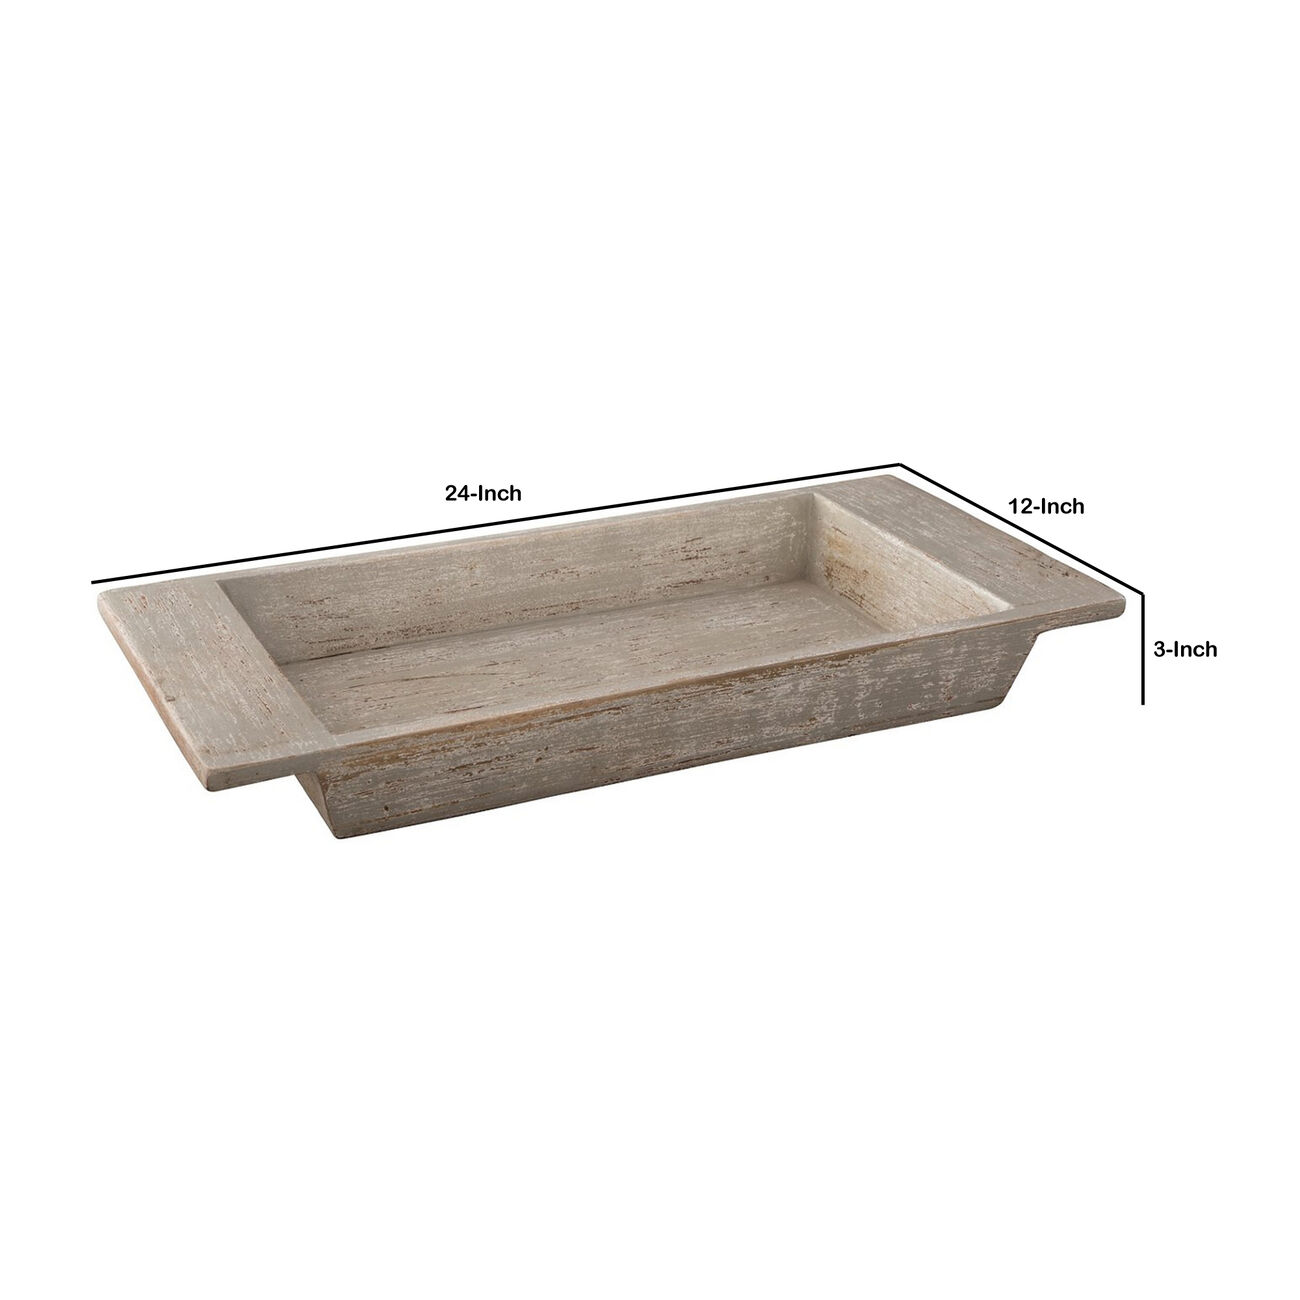 Rectangular Shaped Wooden Tray with Elongated Handles, Washed Brown